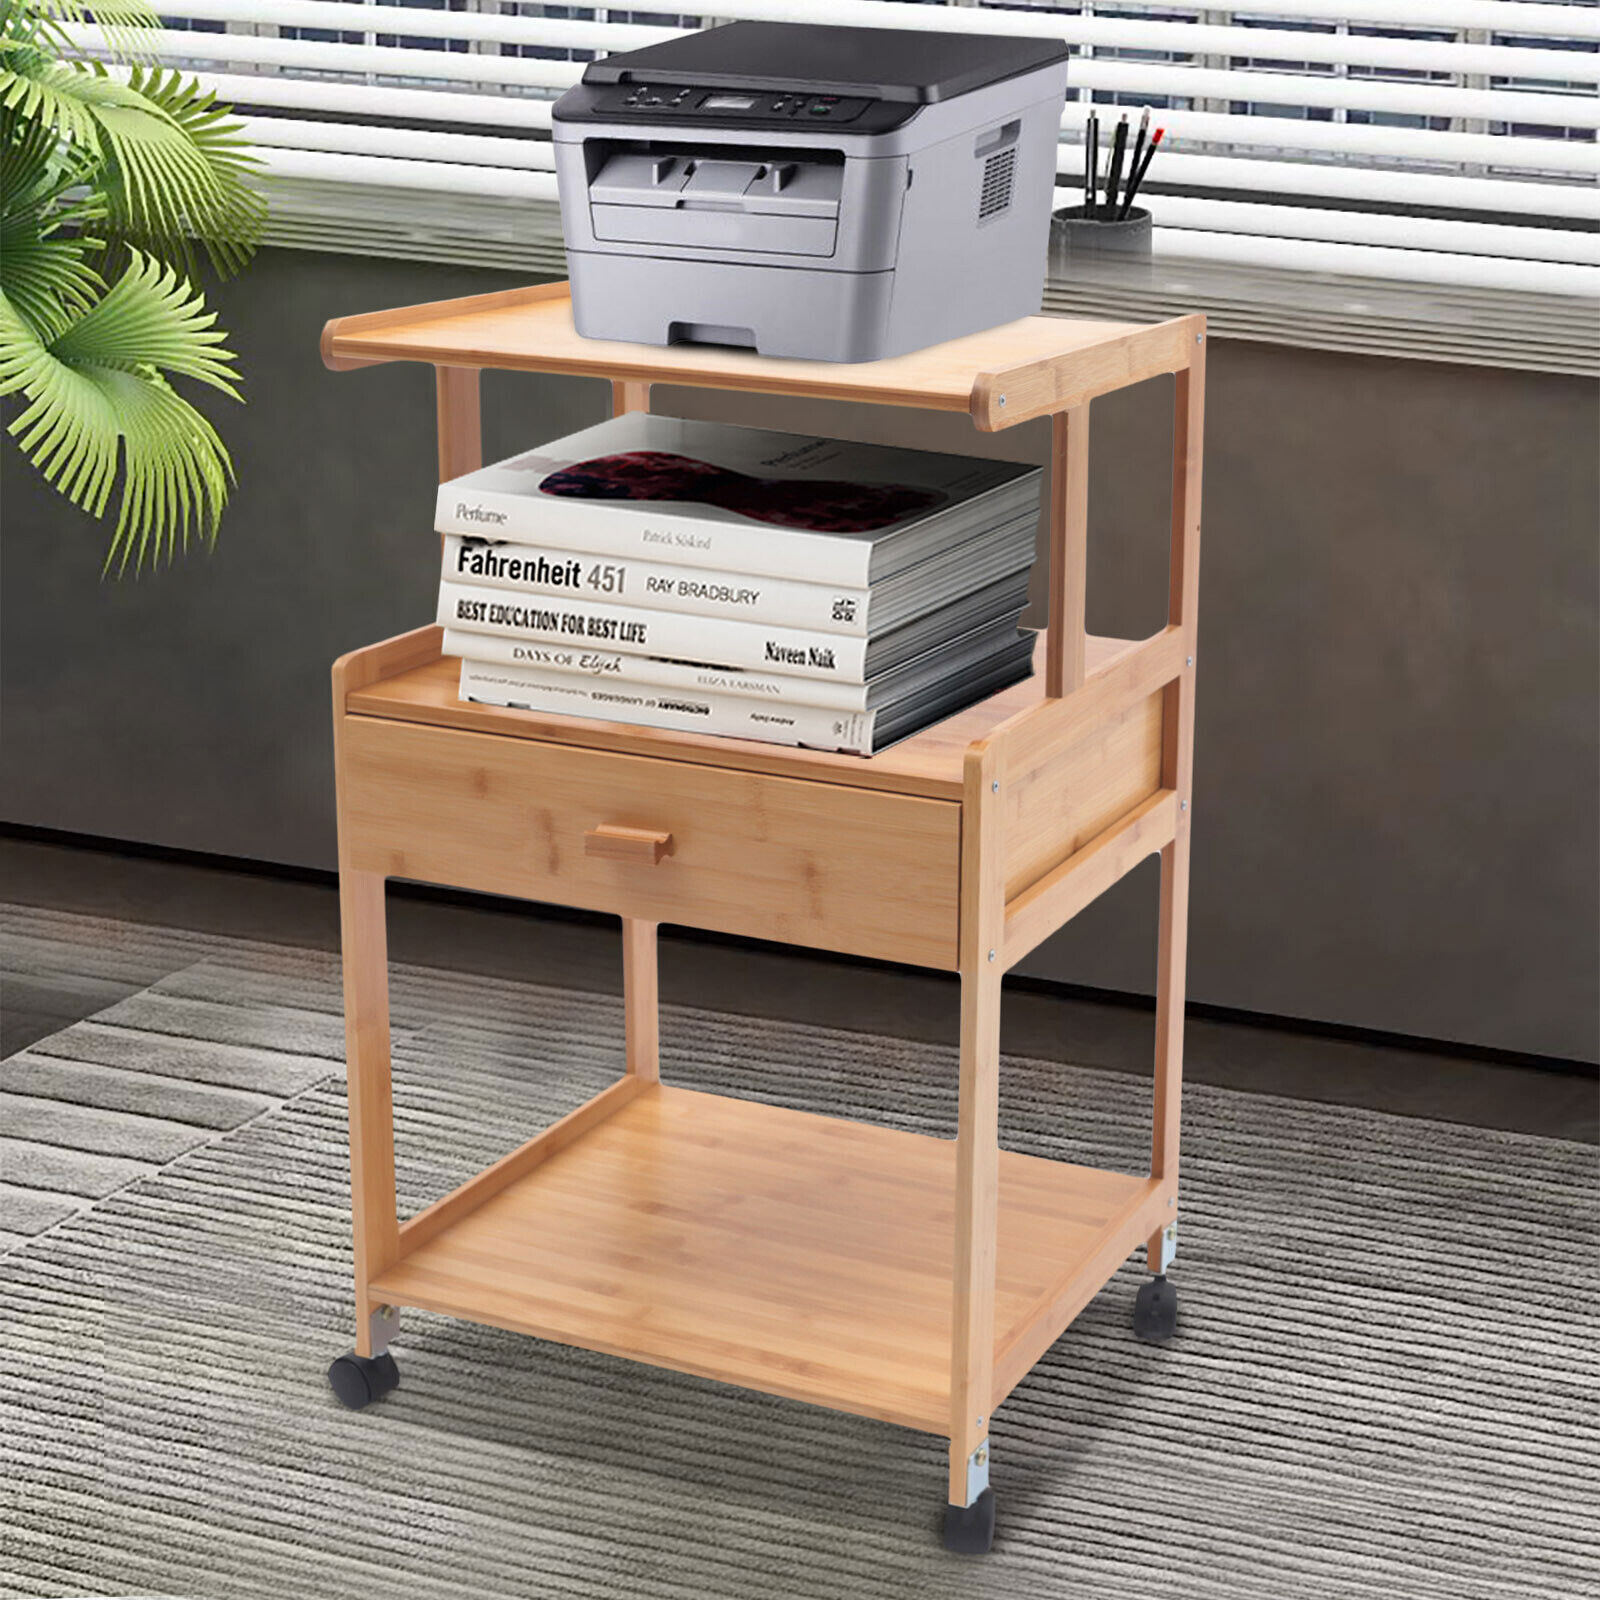 3 Tiers Under Desk Printer Stand Rolling Cart With Rack For Home Office Storage